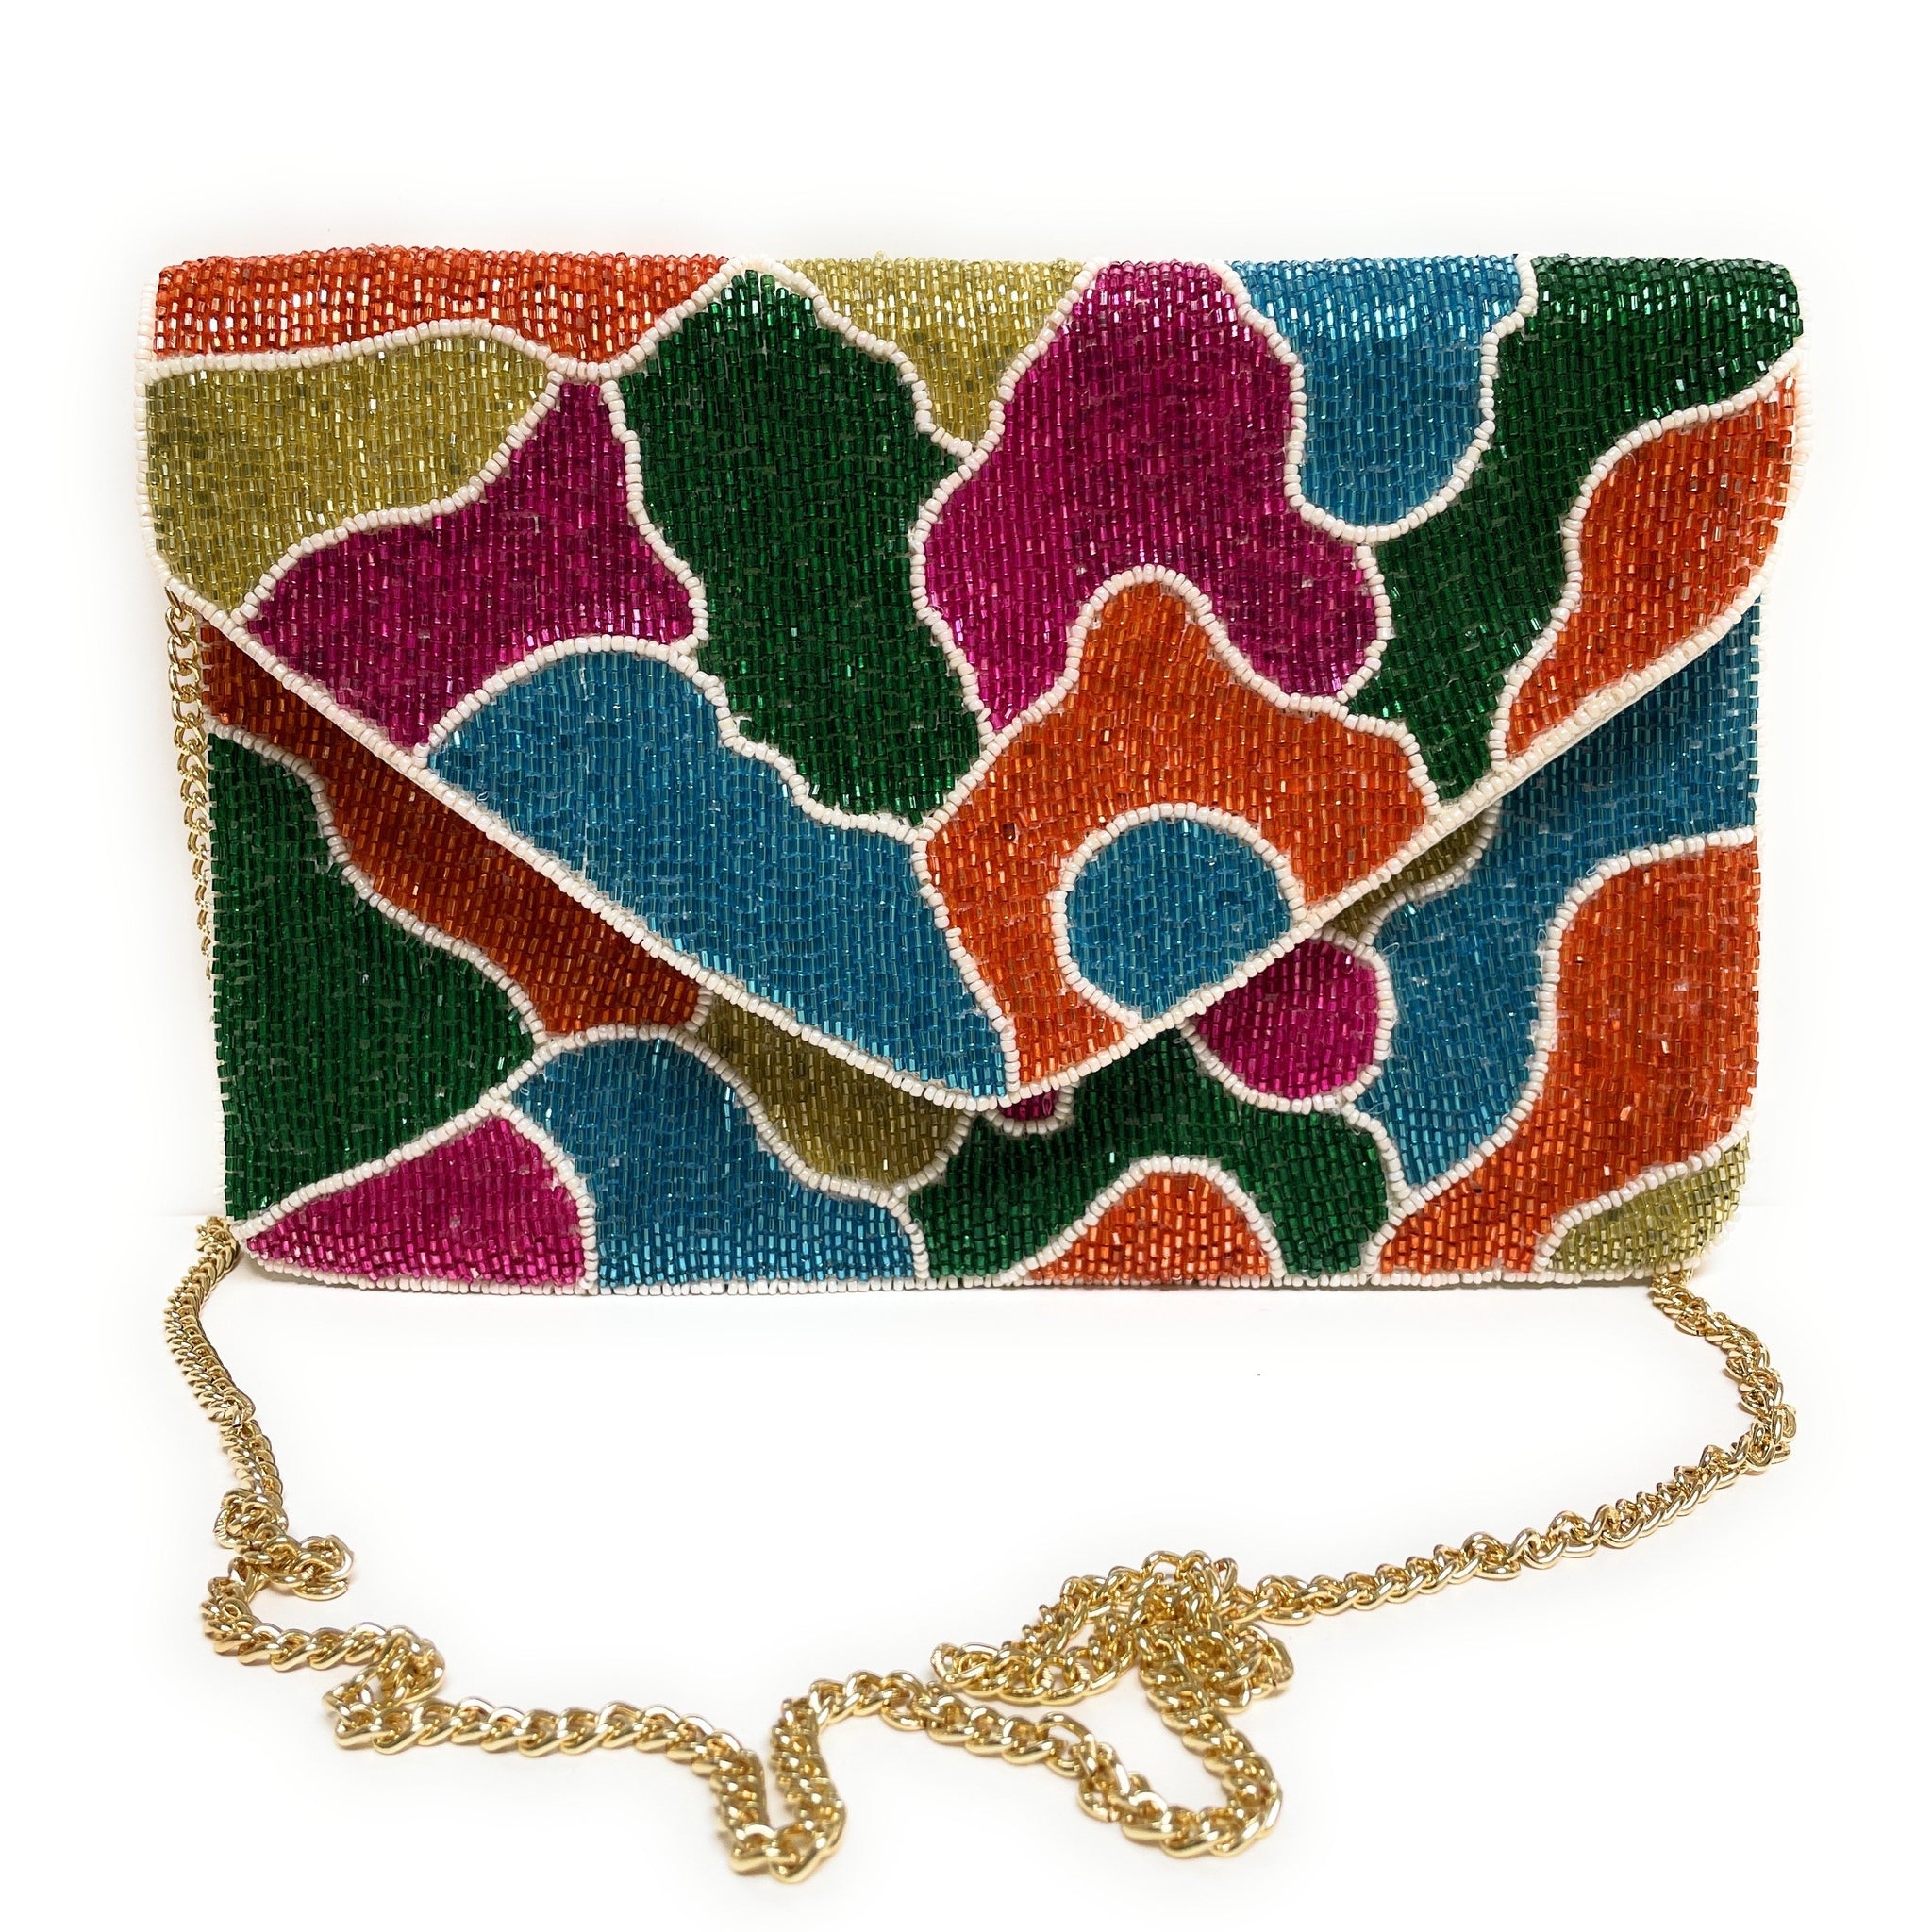 Buy Multi Color Embroidered Clutch Online - RK India Store View